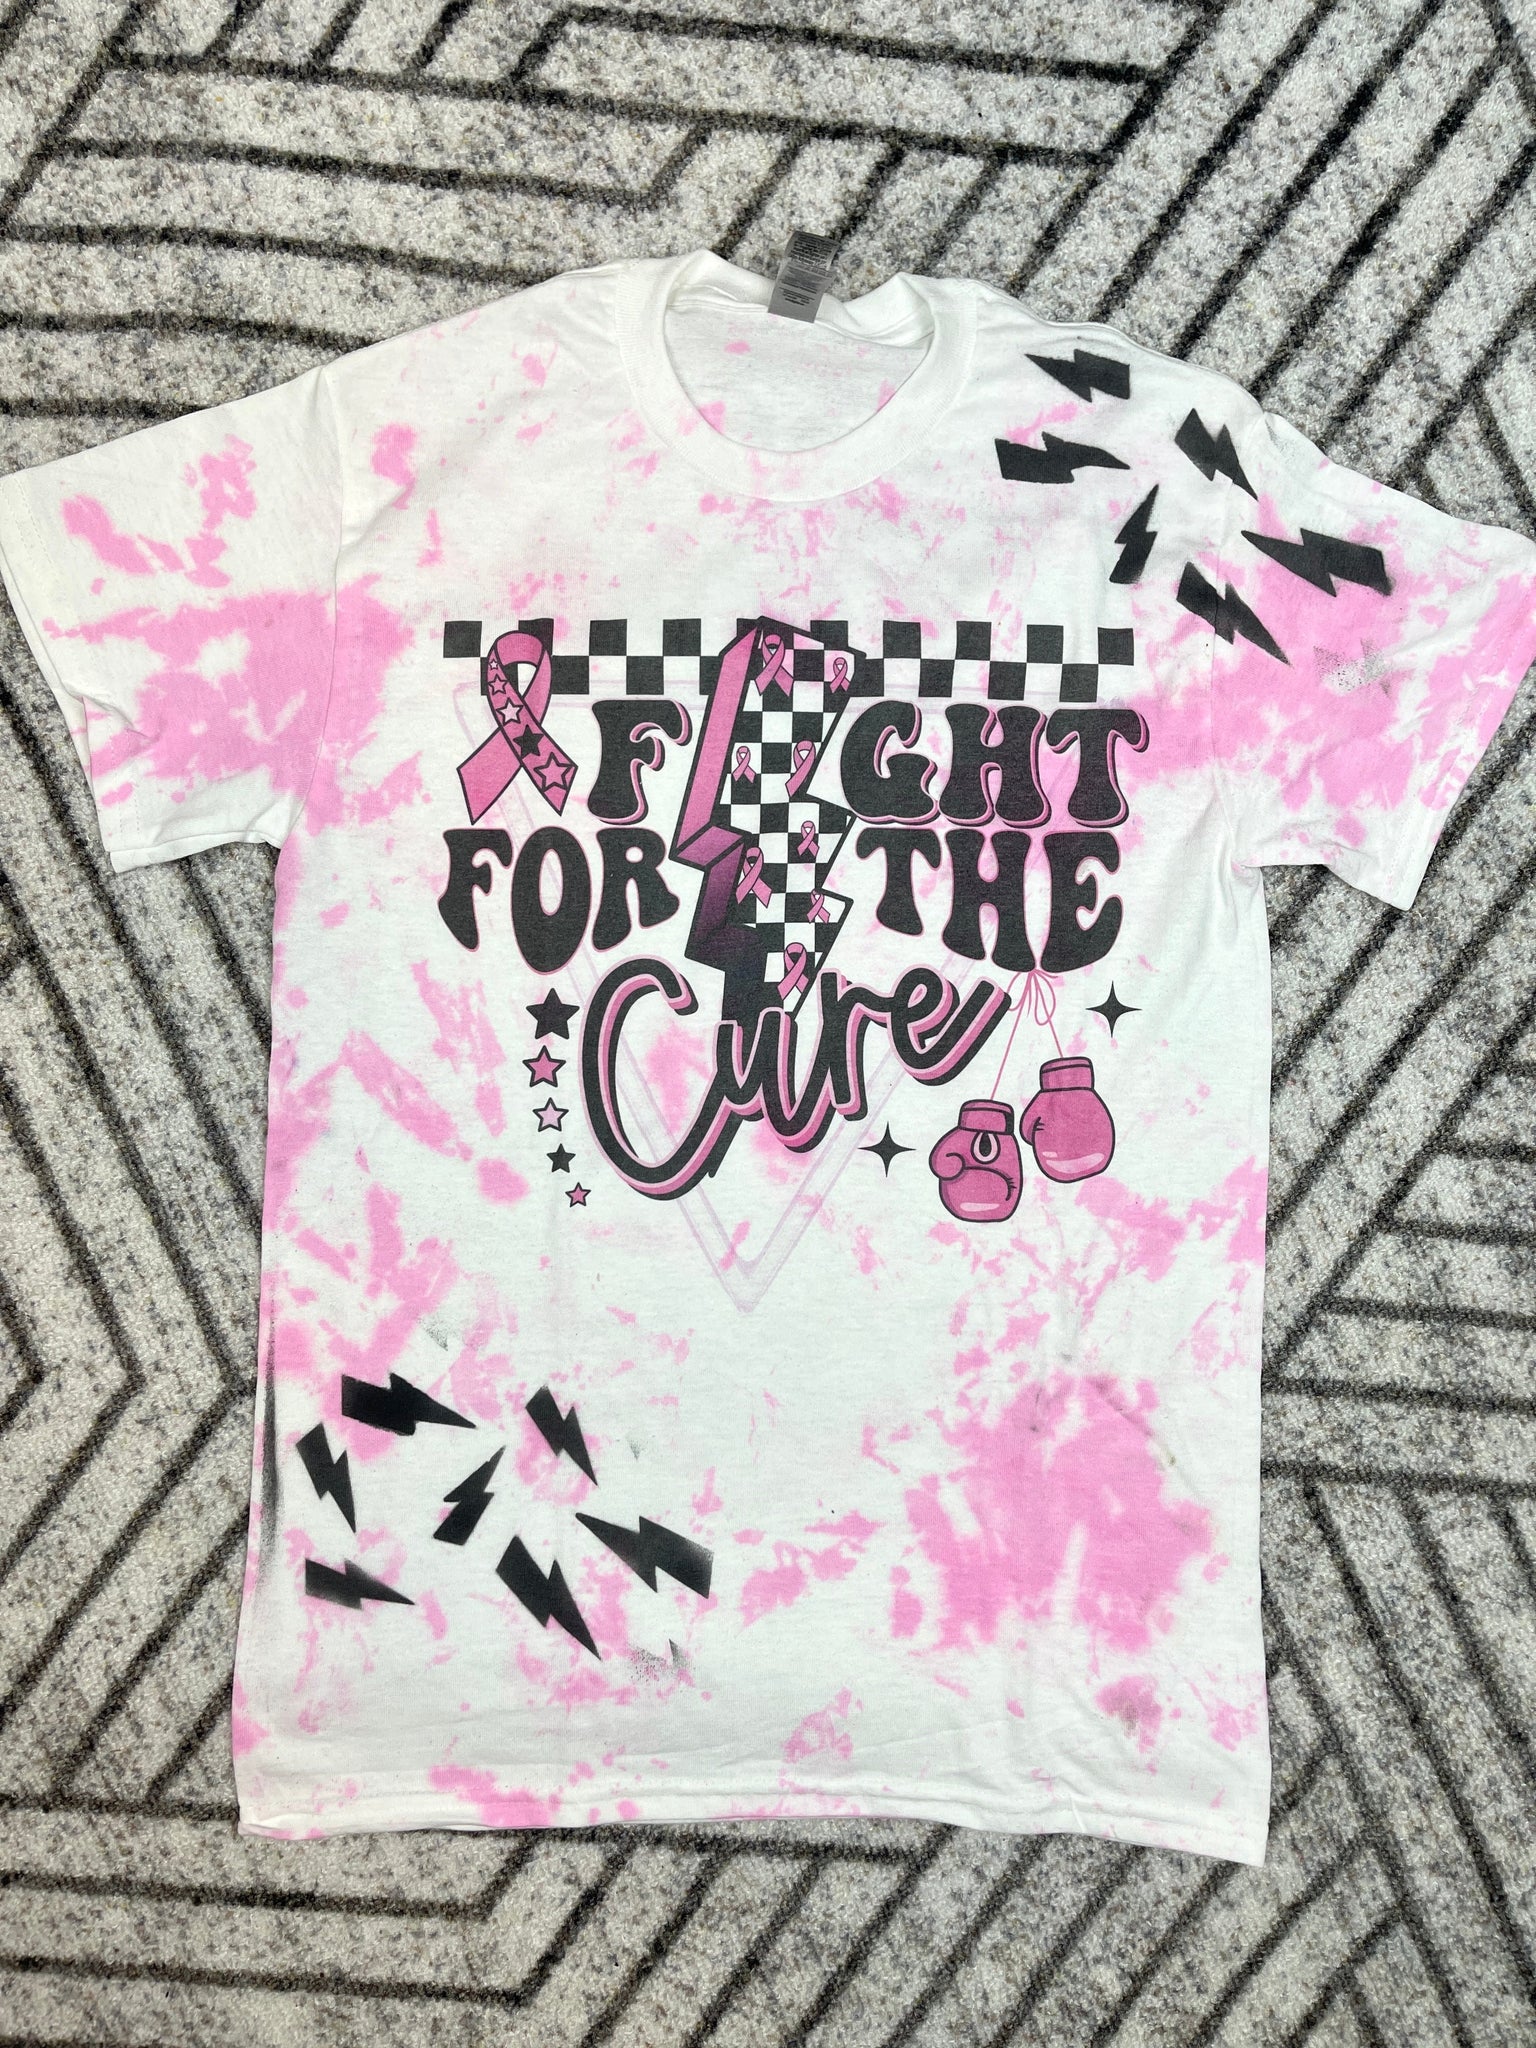 Fight for the cure